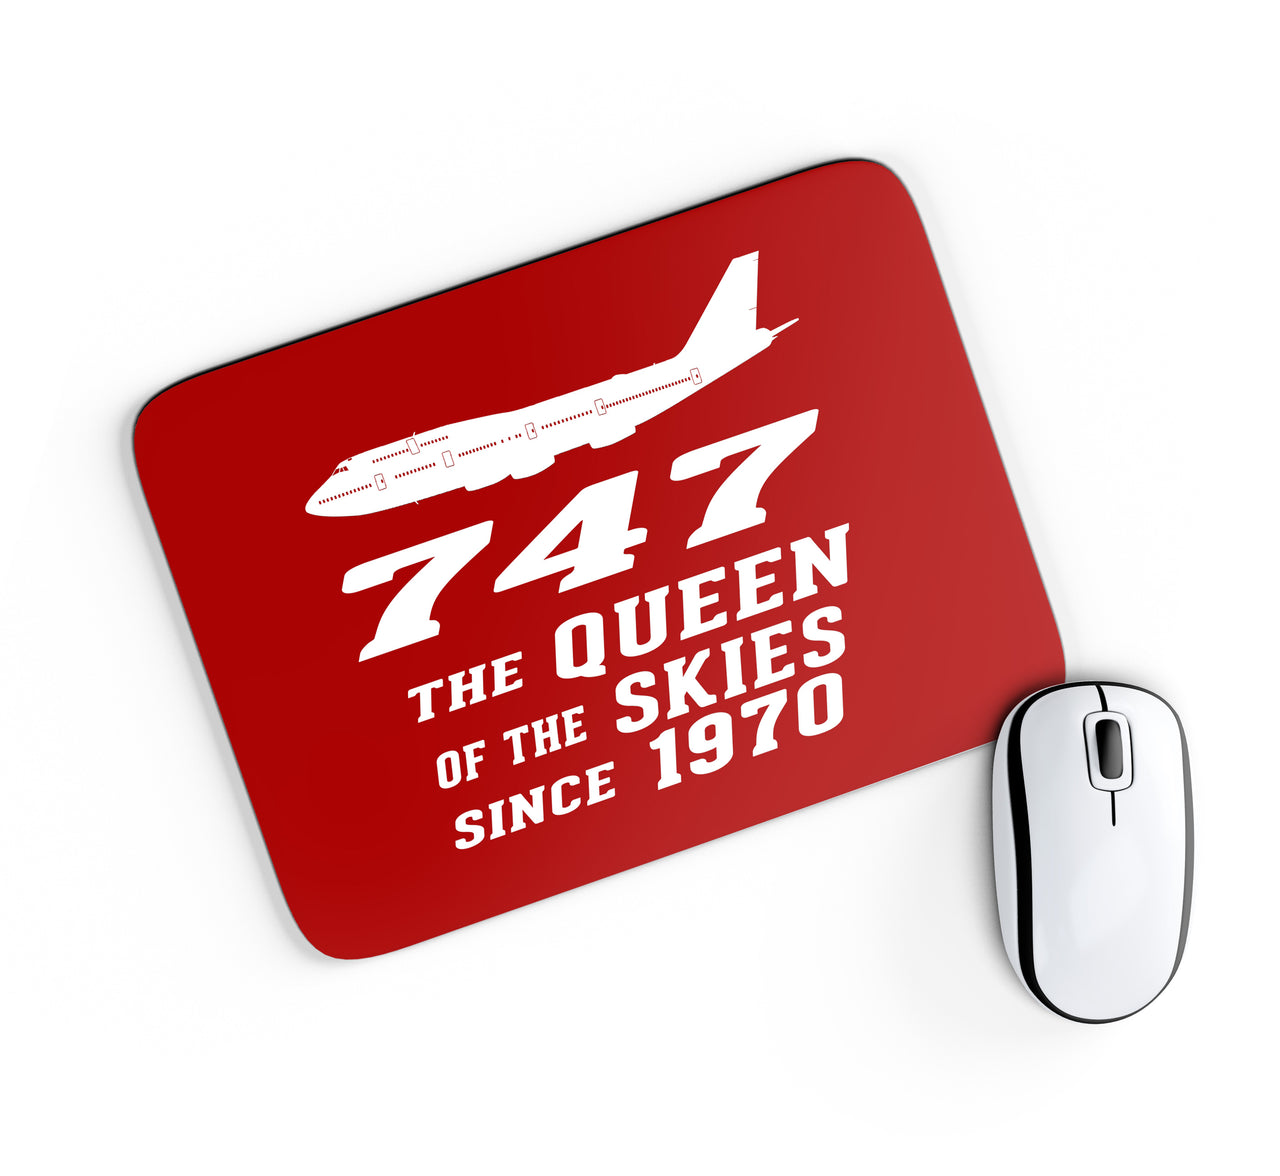 Boeing 747 - Queen of the Skies (2) Designed Mouse Pads